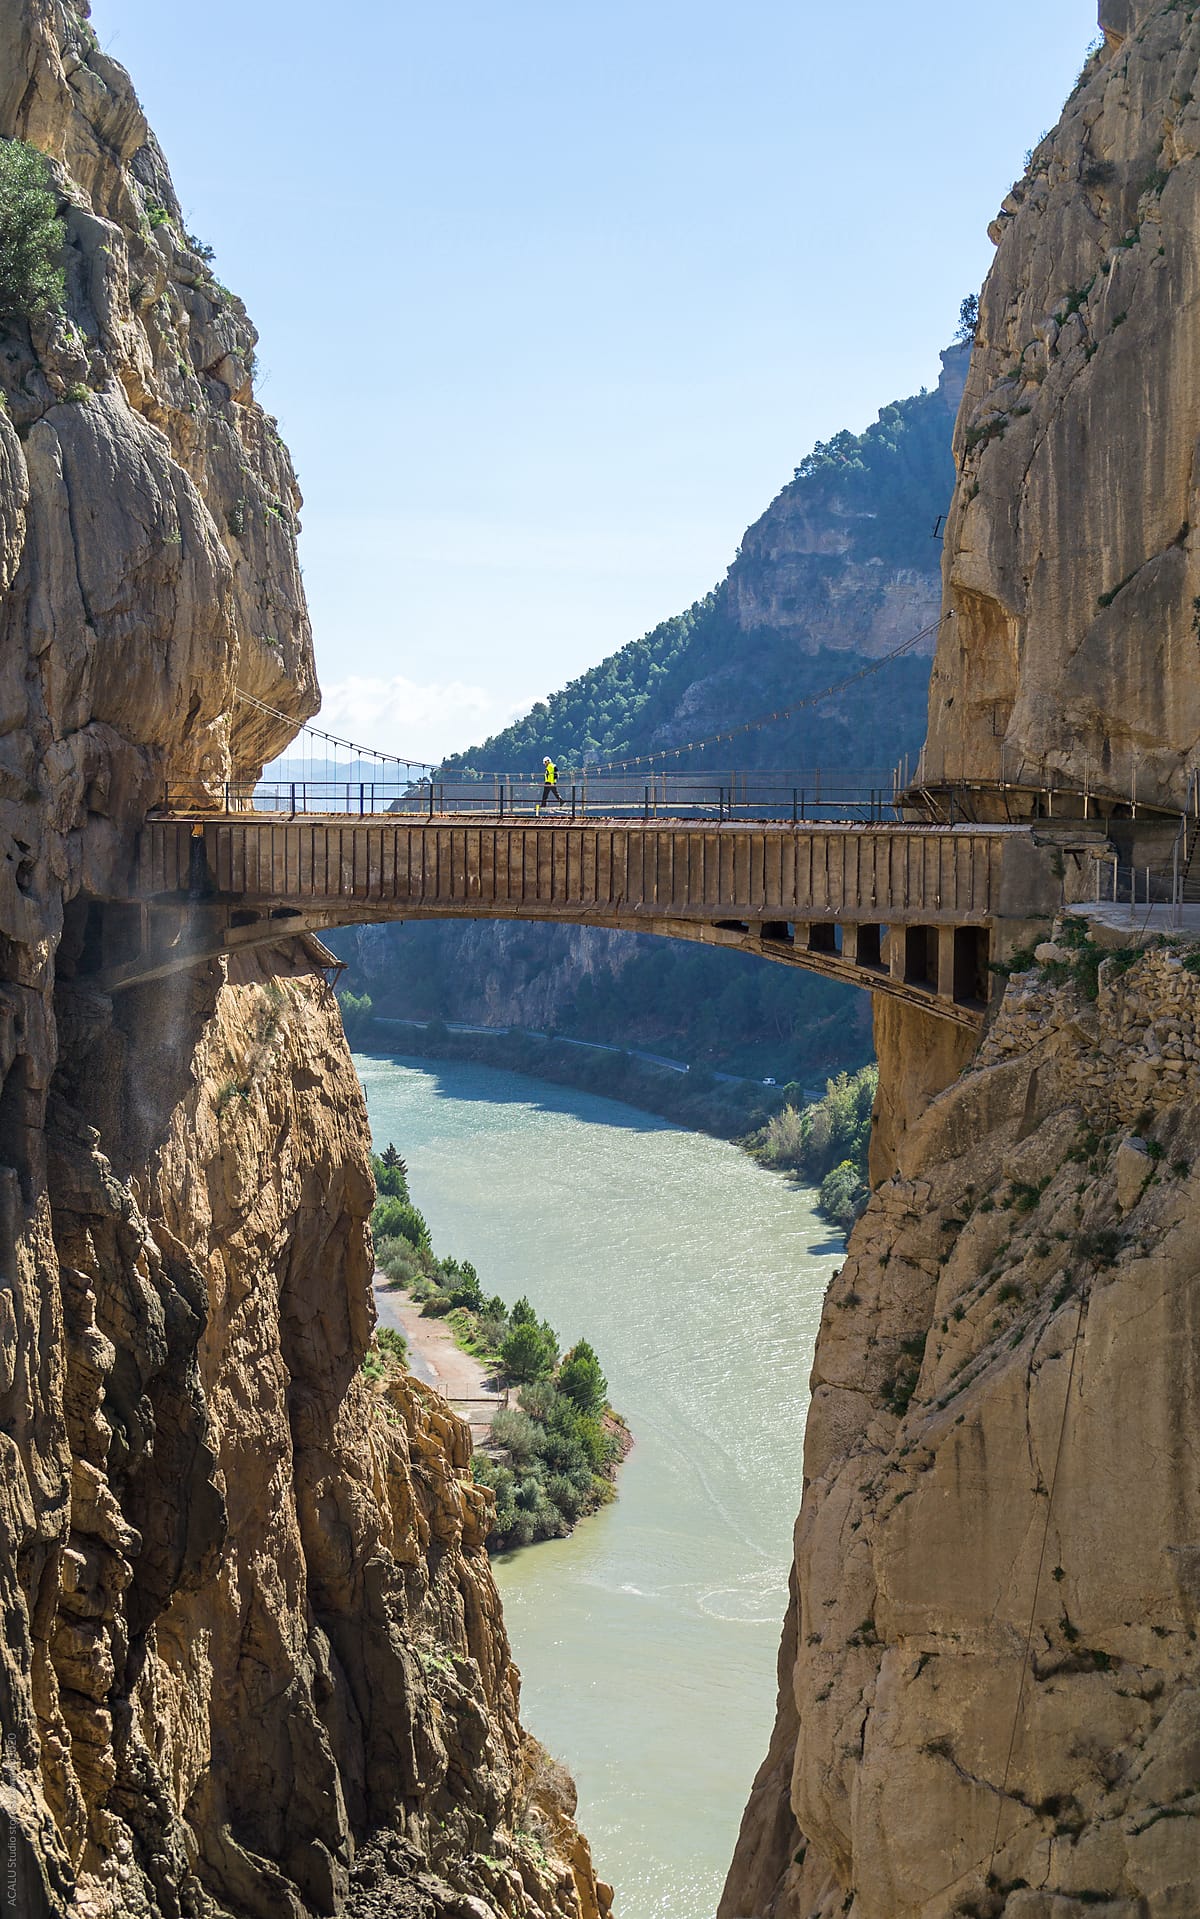 Man walking on the bridge of a canyon in Caminito del Rey